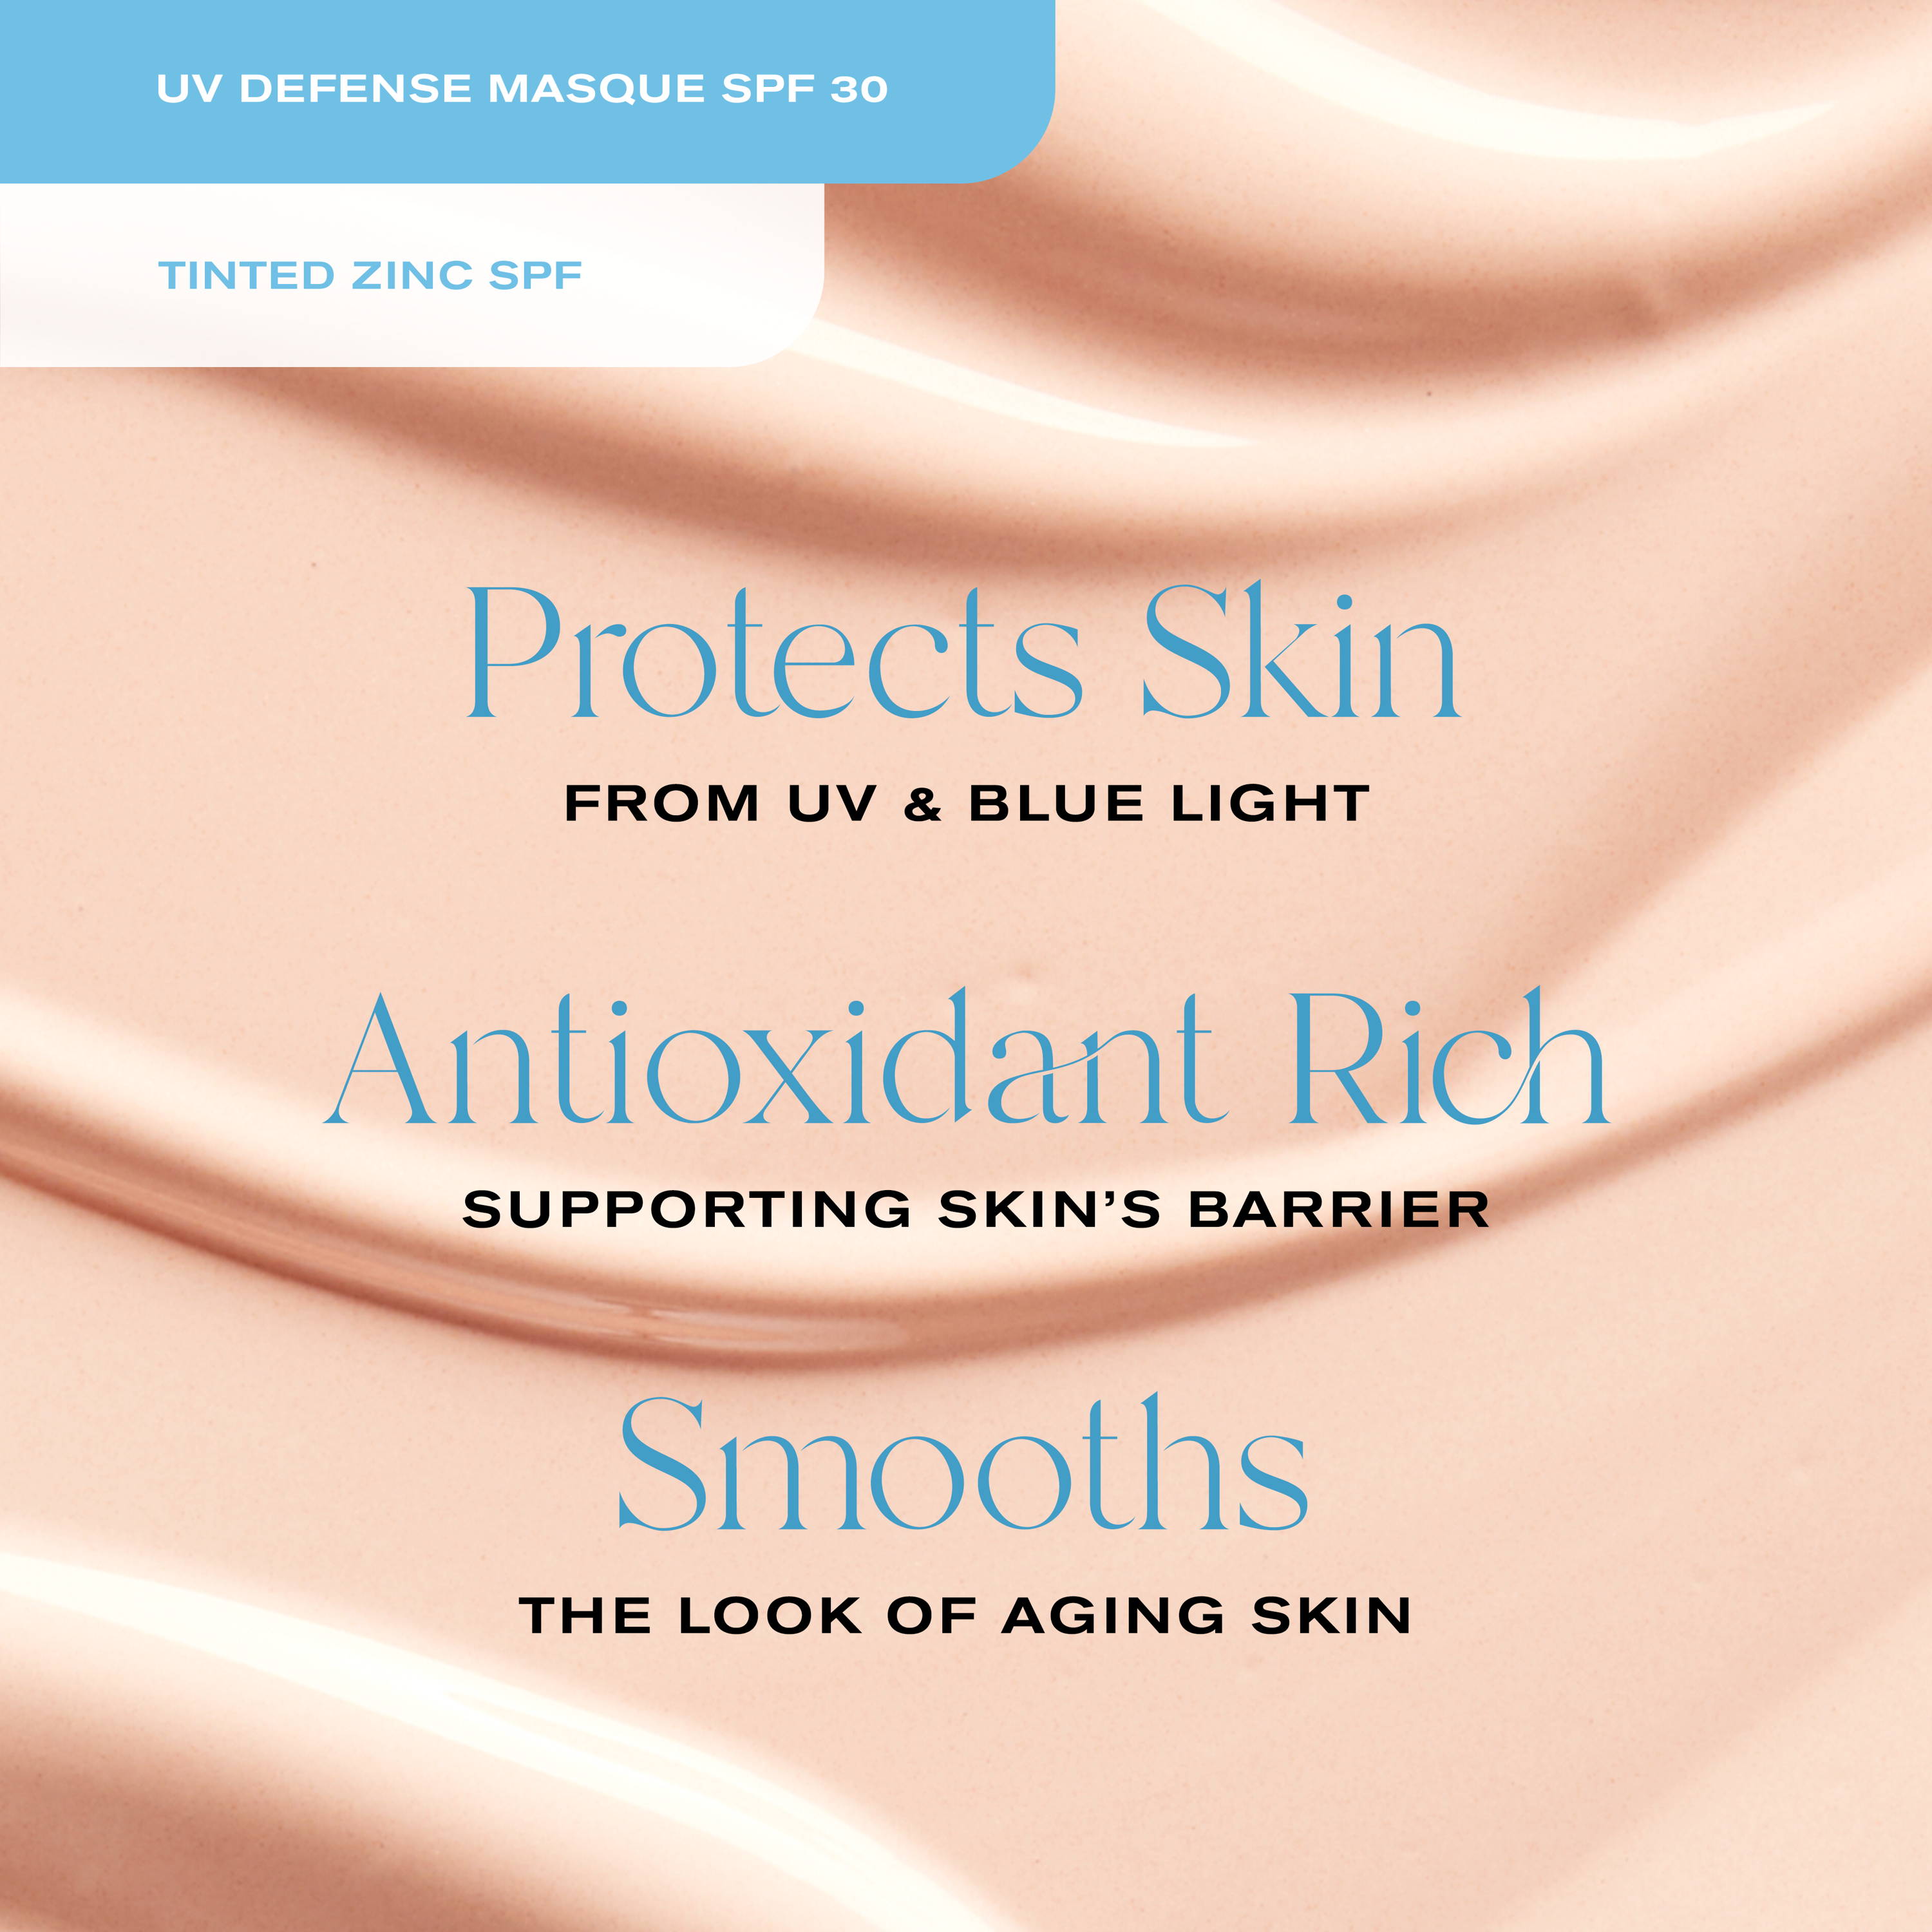 UV Defense Masque SPF 30 Tinted Zinc SPF | Protects skin from UV & blue light. Antioxidant rich supporting skin's barrier. Smooths the look of aging. 